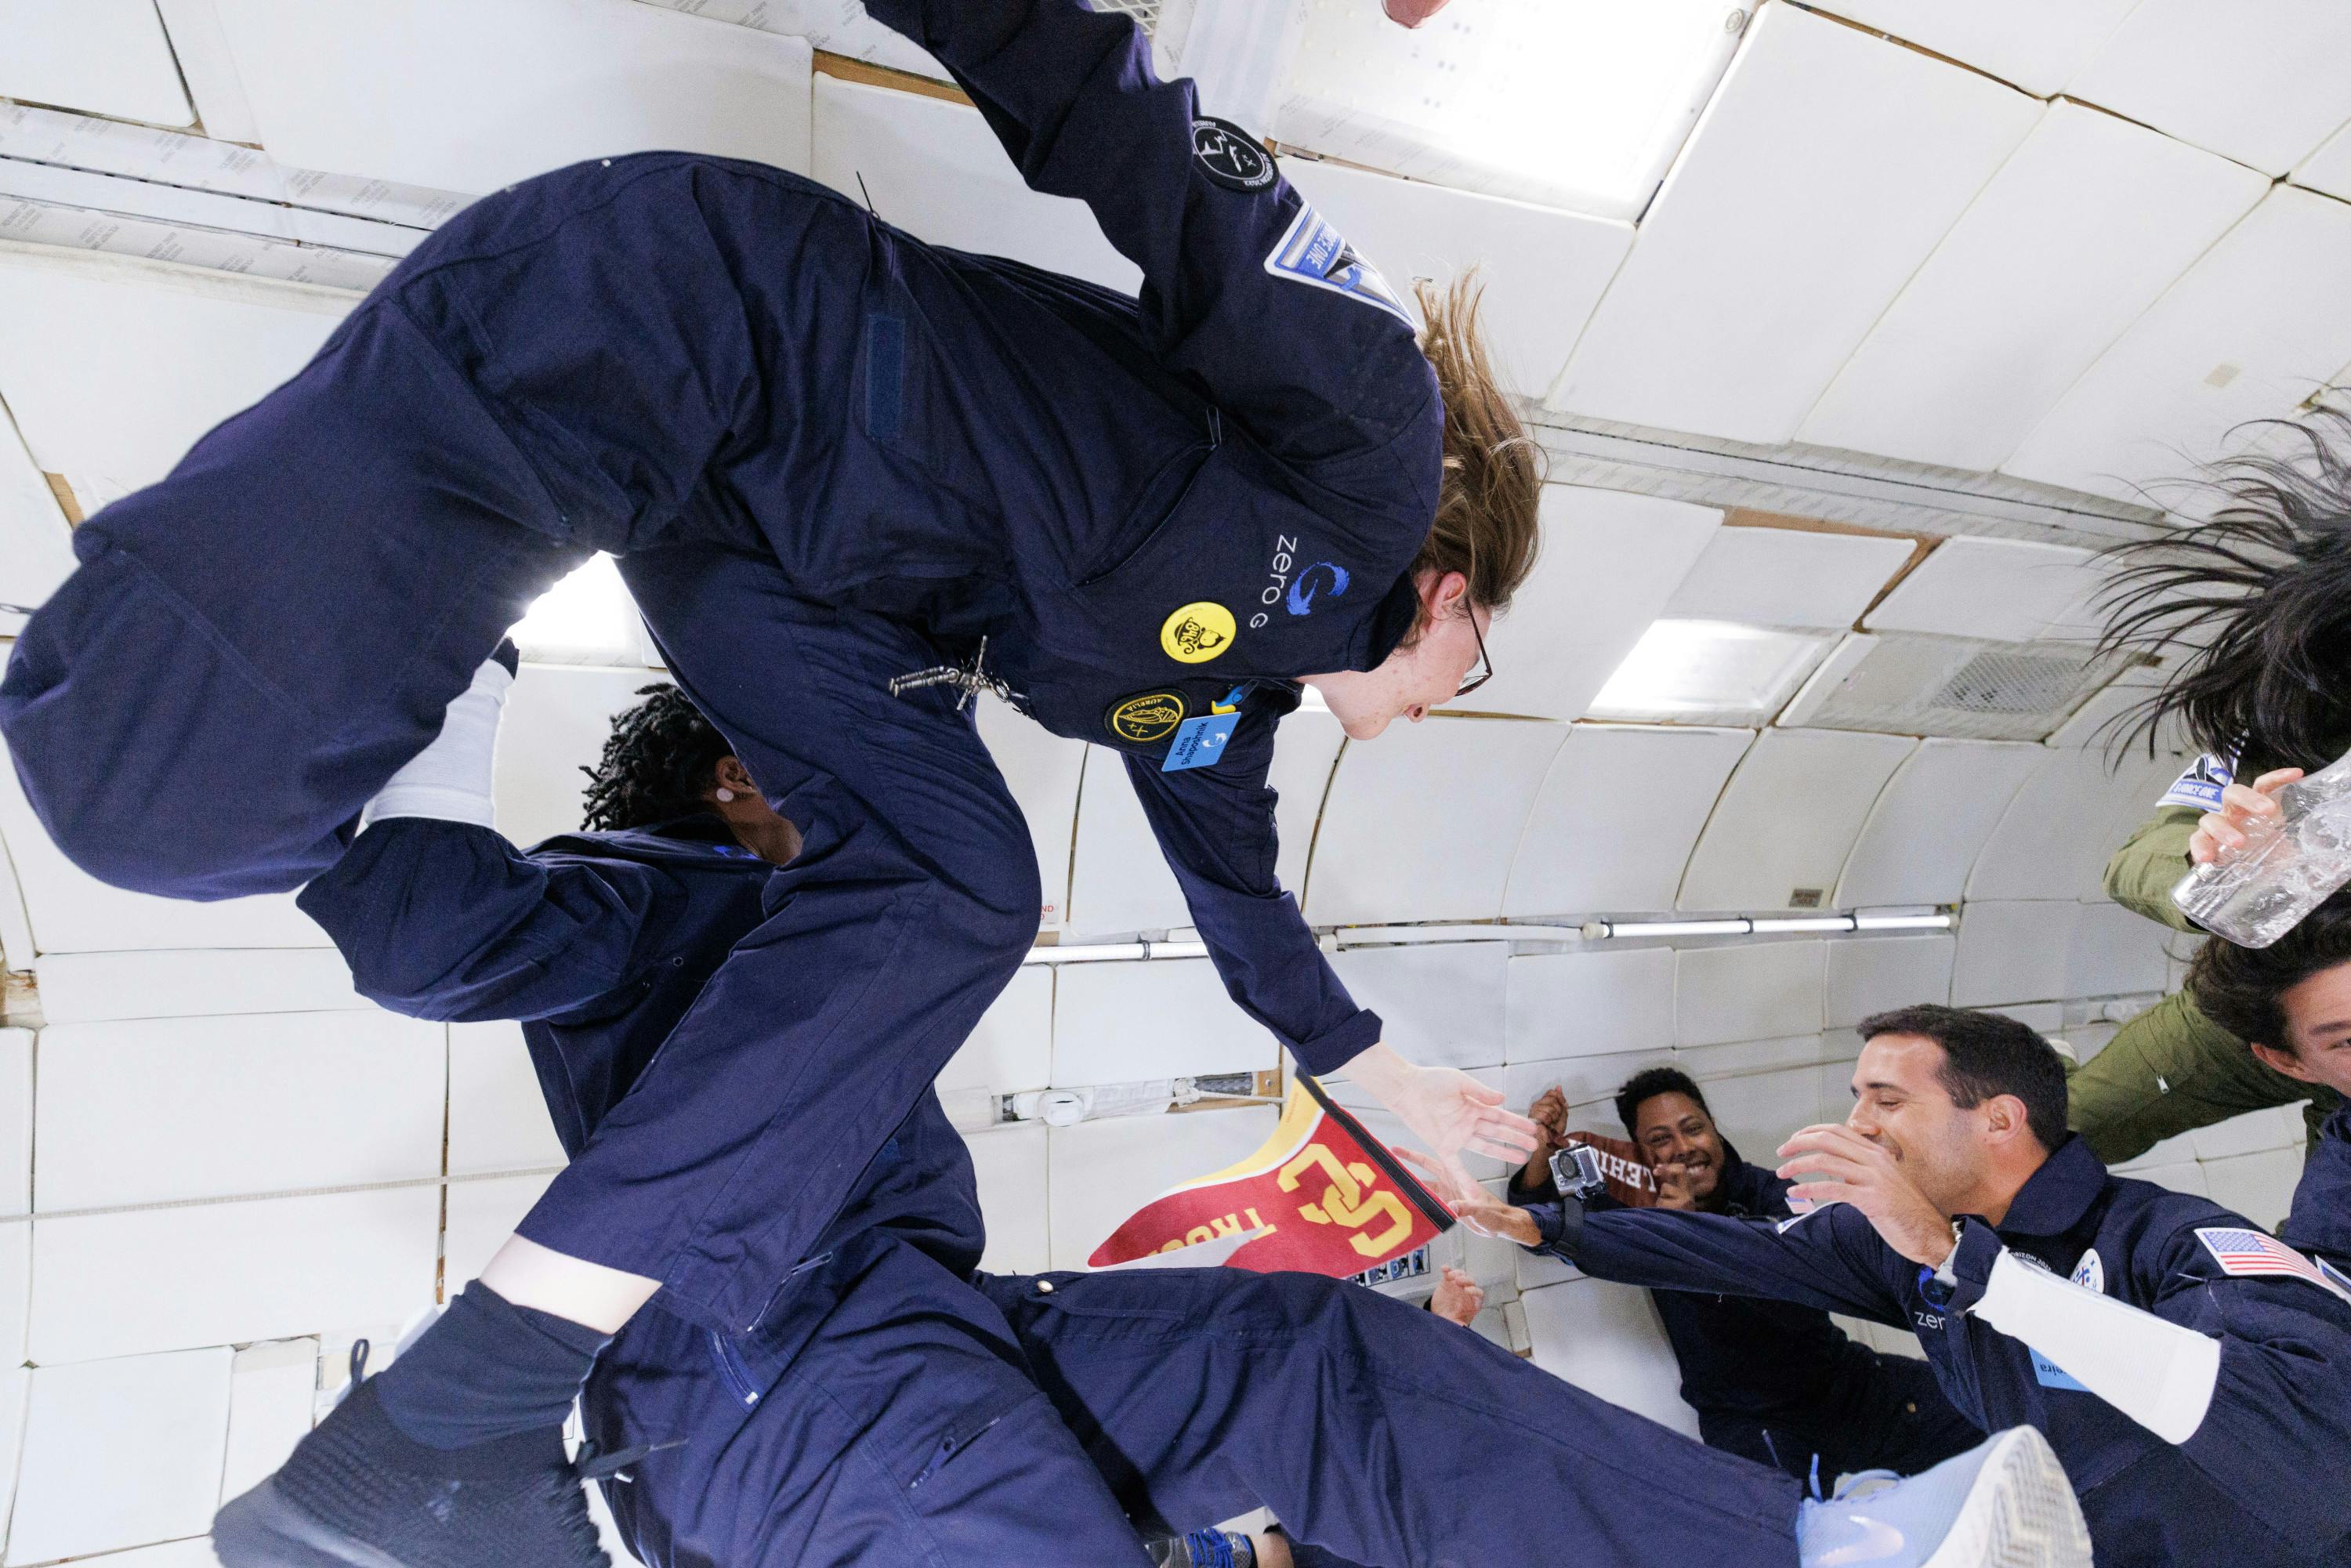 A young woman floats in zero gravity in a flight suit, posing for camera